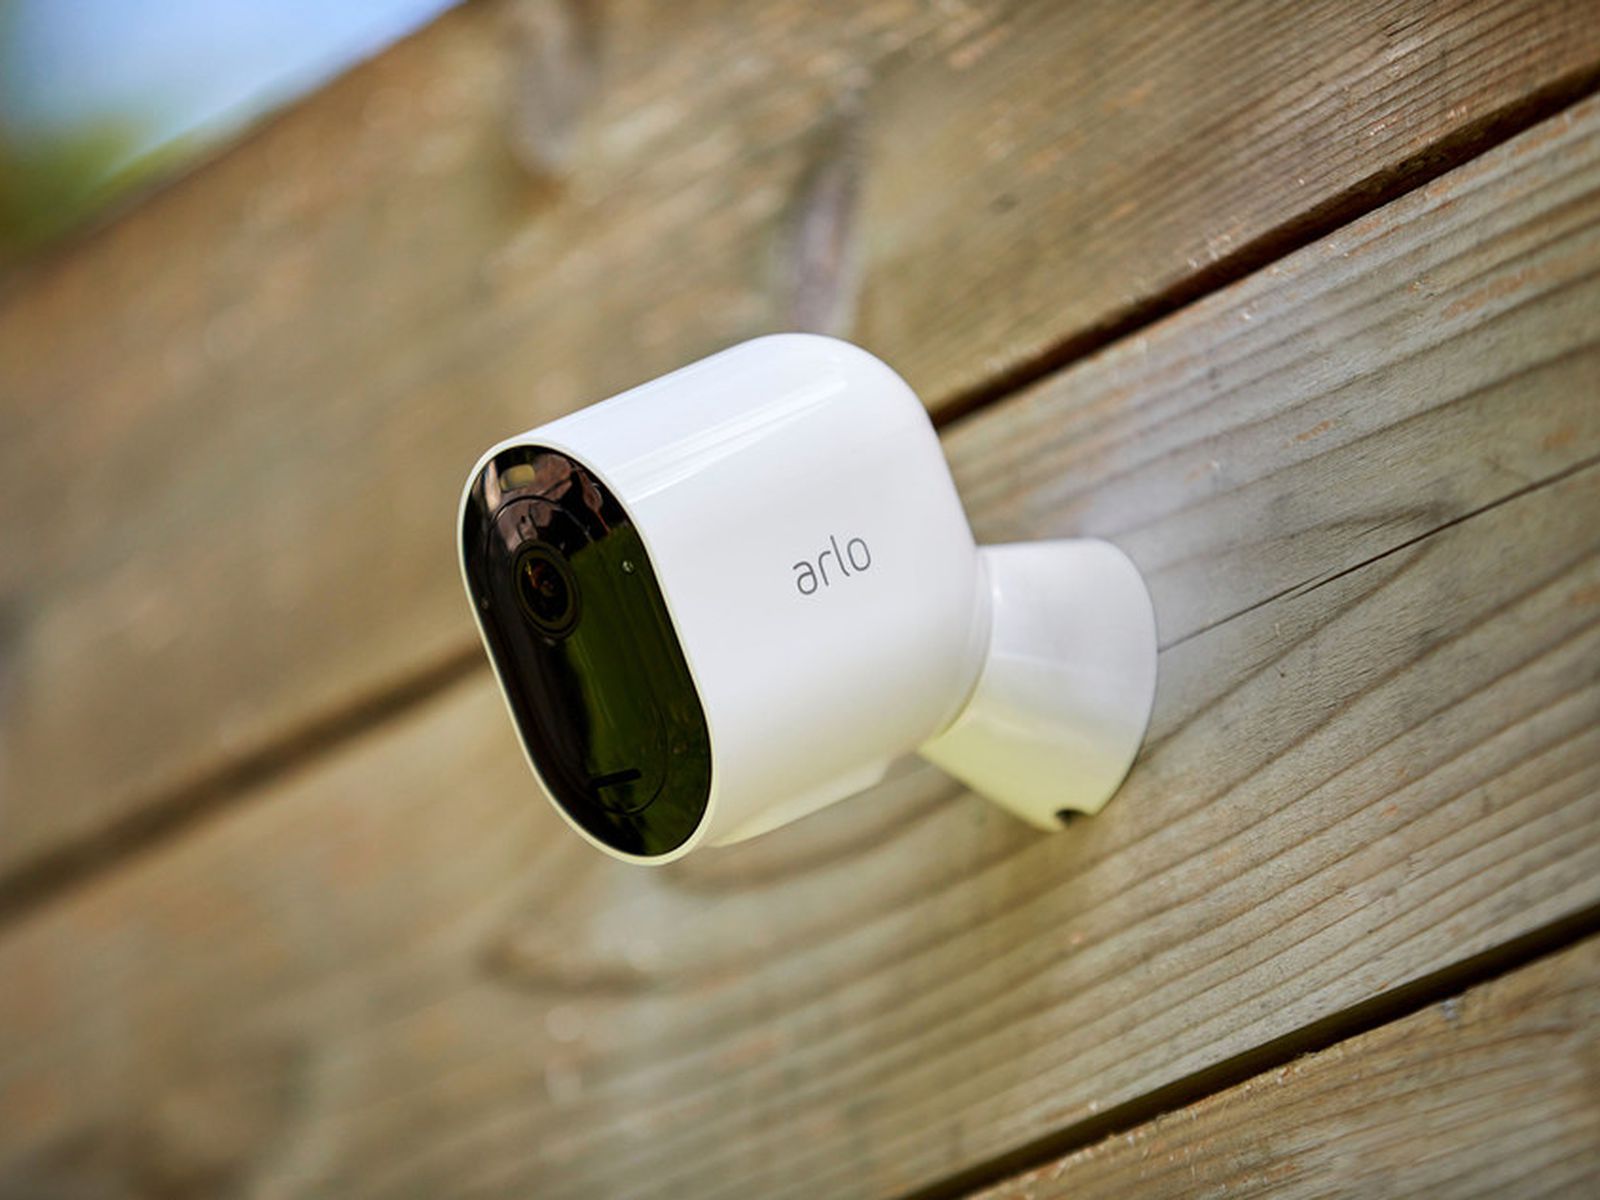 tiggeri Uafhængighed Resten Arlo Introduces Pro 4 Security Camera With Easier Wi-Fi Setup, But Lacks  HomeKit at Launch [Updated] - MacRumors